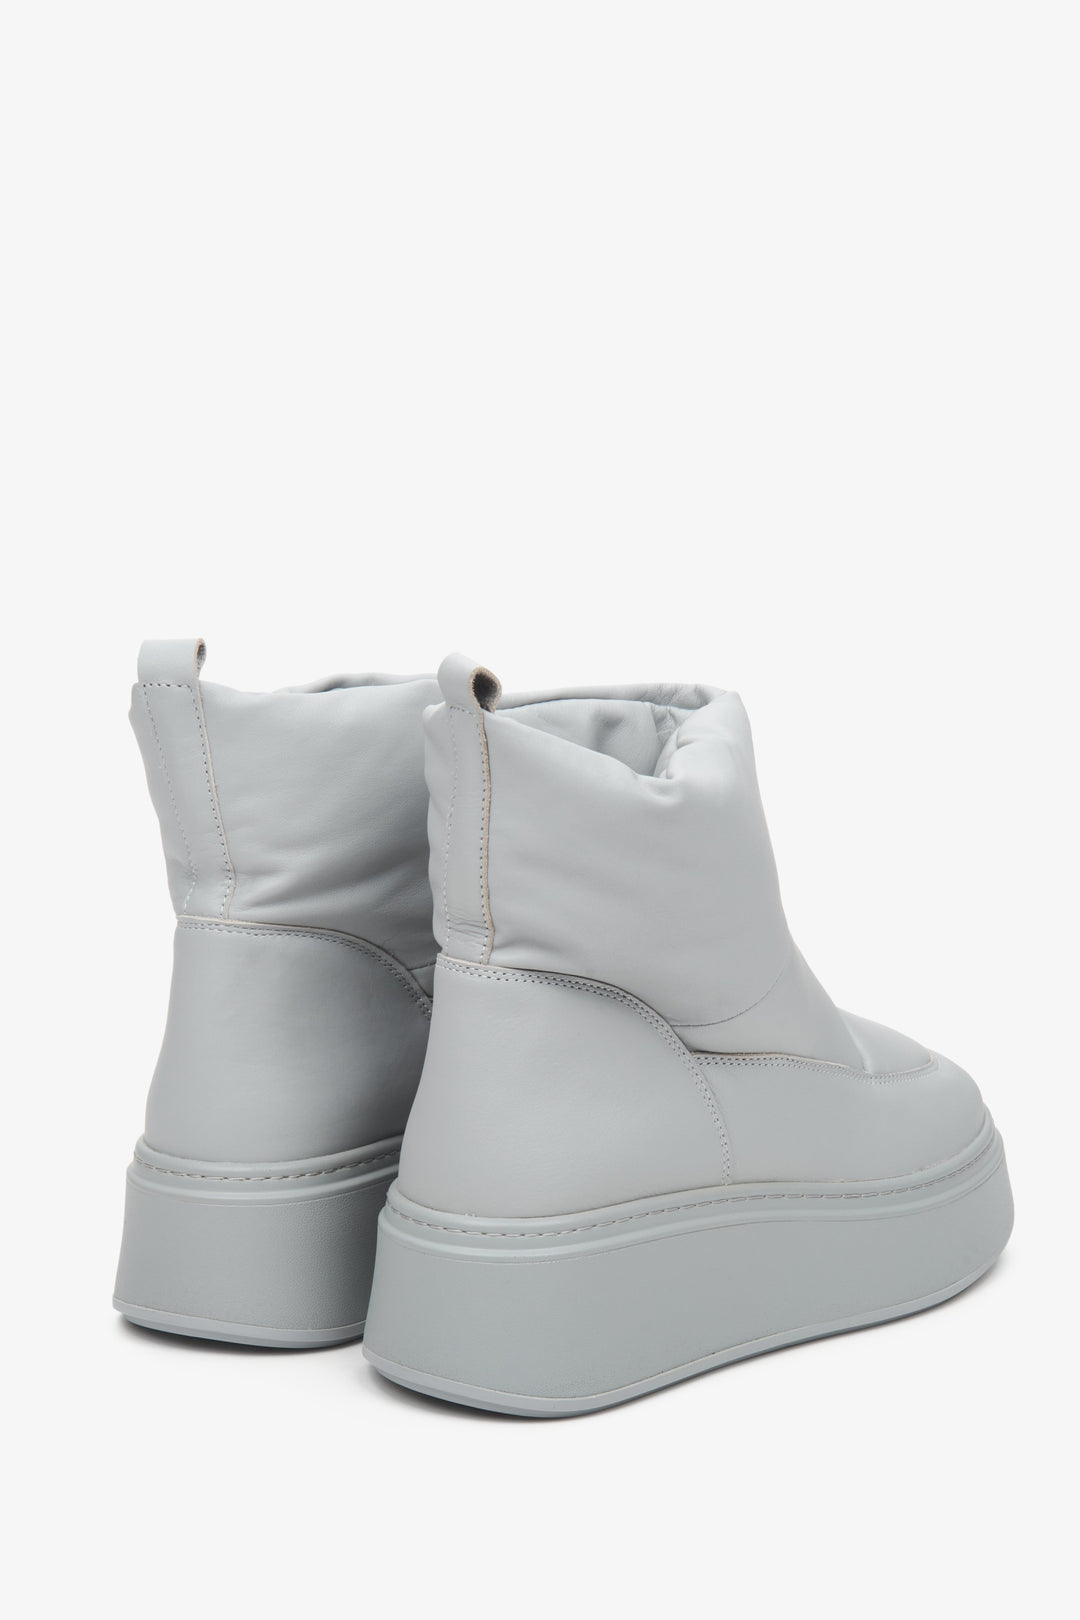 Estro women's grey leather winter snow boots with natural fur - close-up on the heel and side seam.